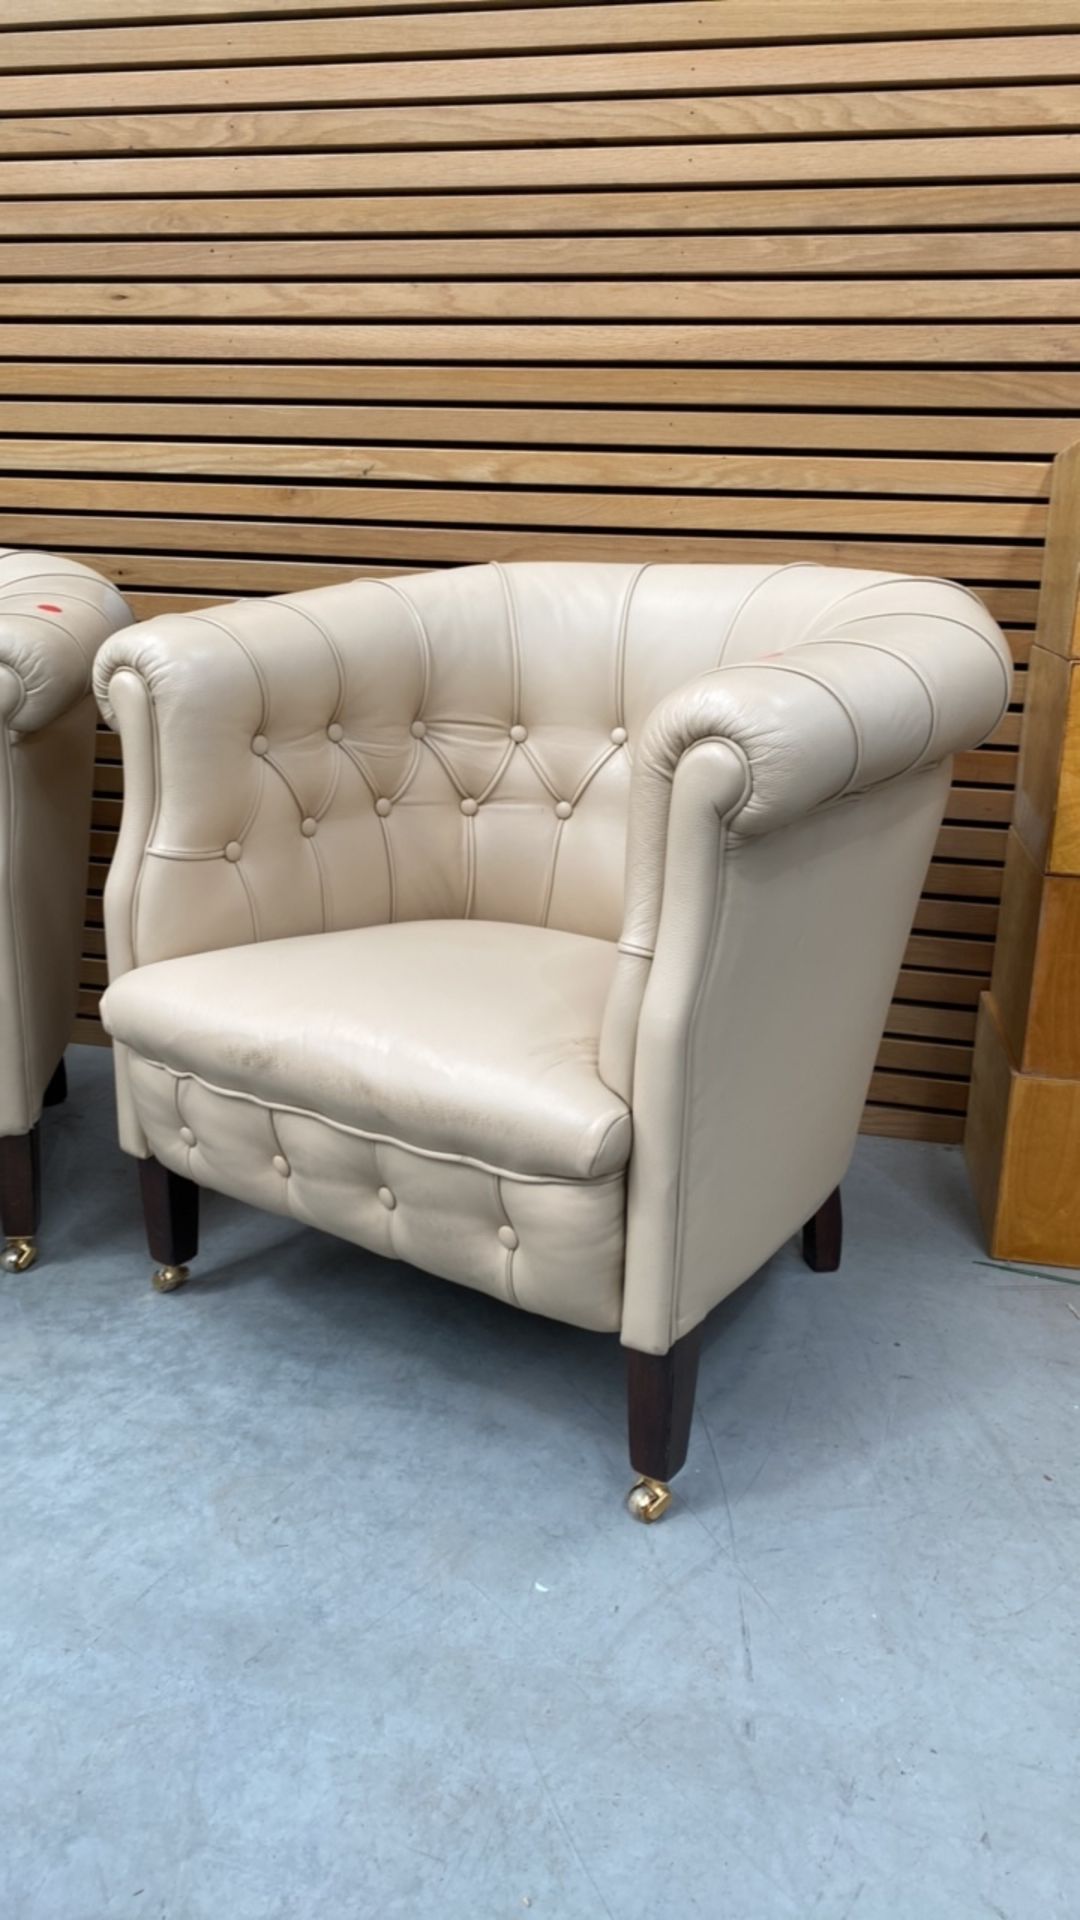 Faux-Poltrona Frau Buttoned Tub Accent Armchair X2 - Image 3 of 4